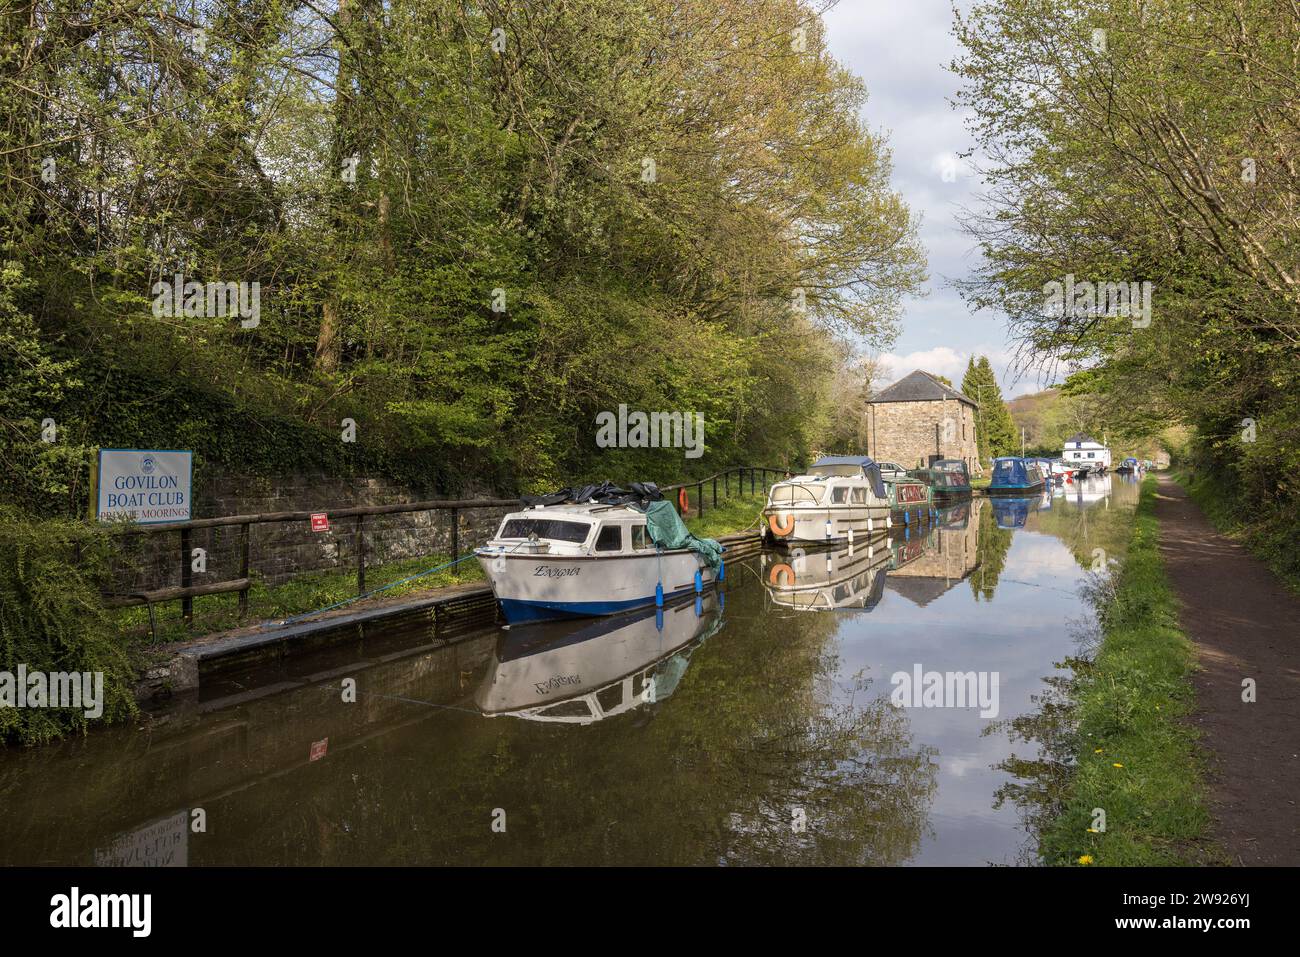 Boast club sign and moored boats on the Brecon and Monmouth canal, Govilon, Wales, UK Stock Photo